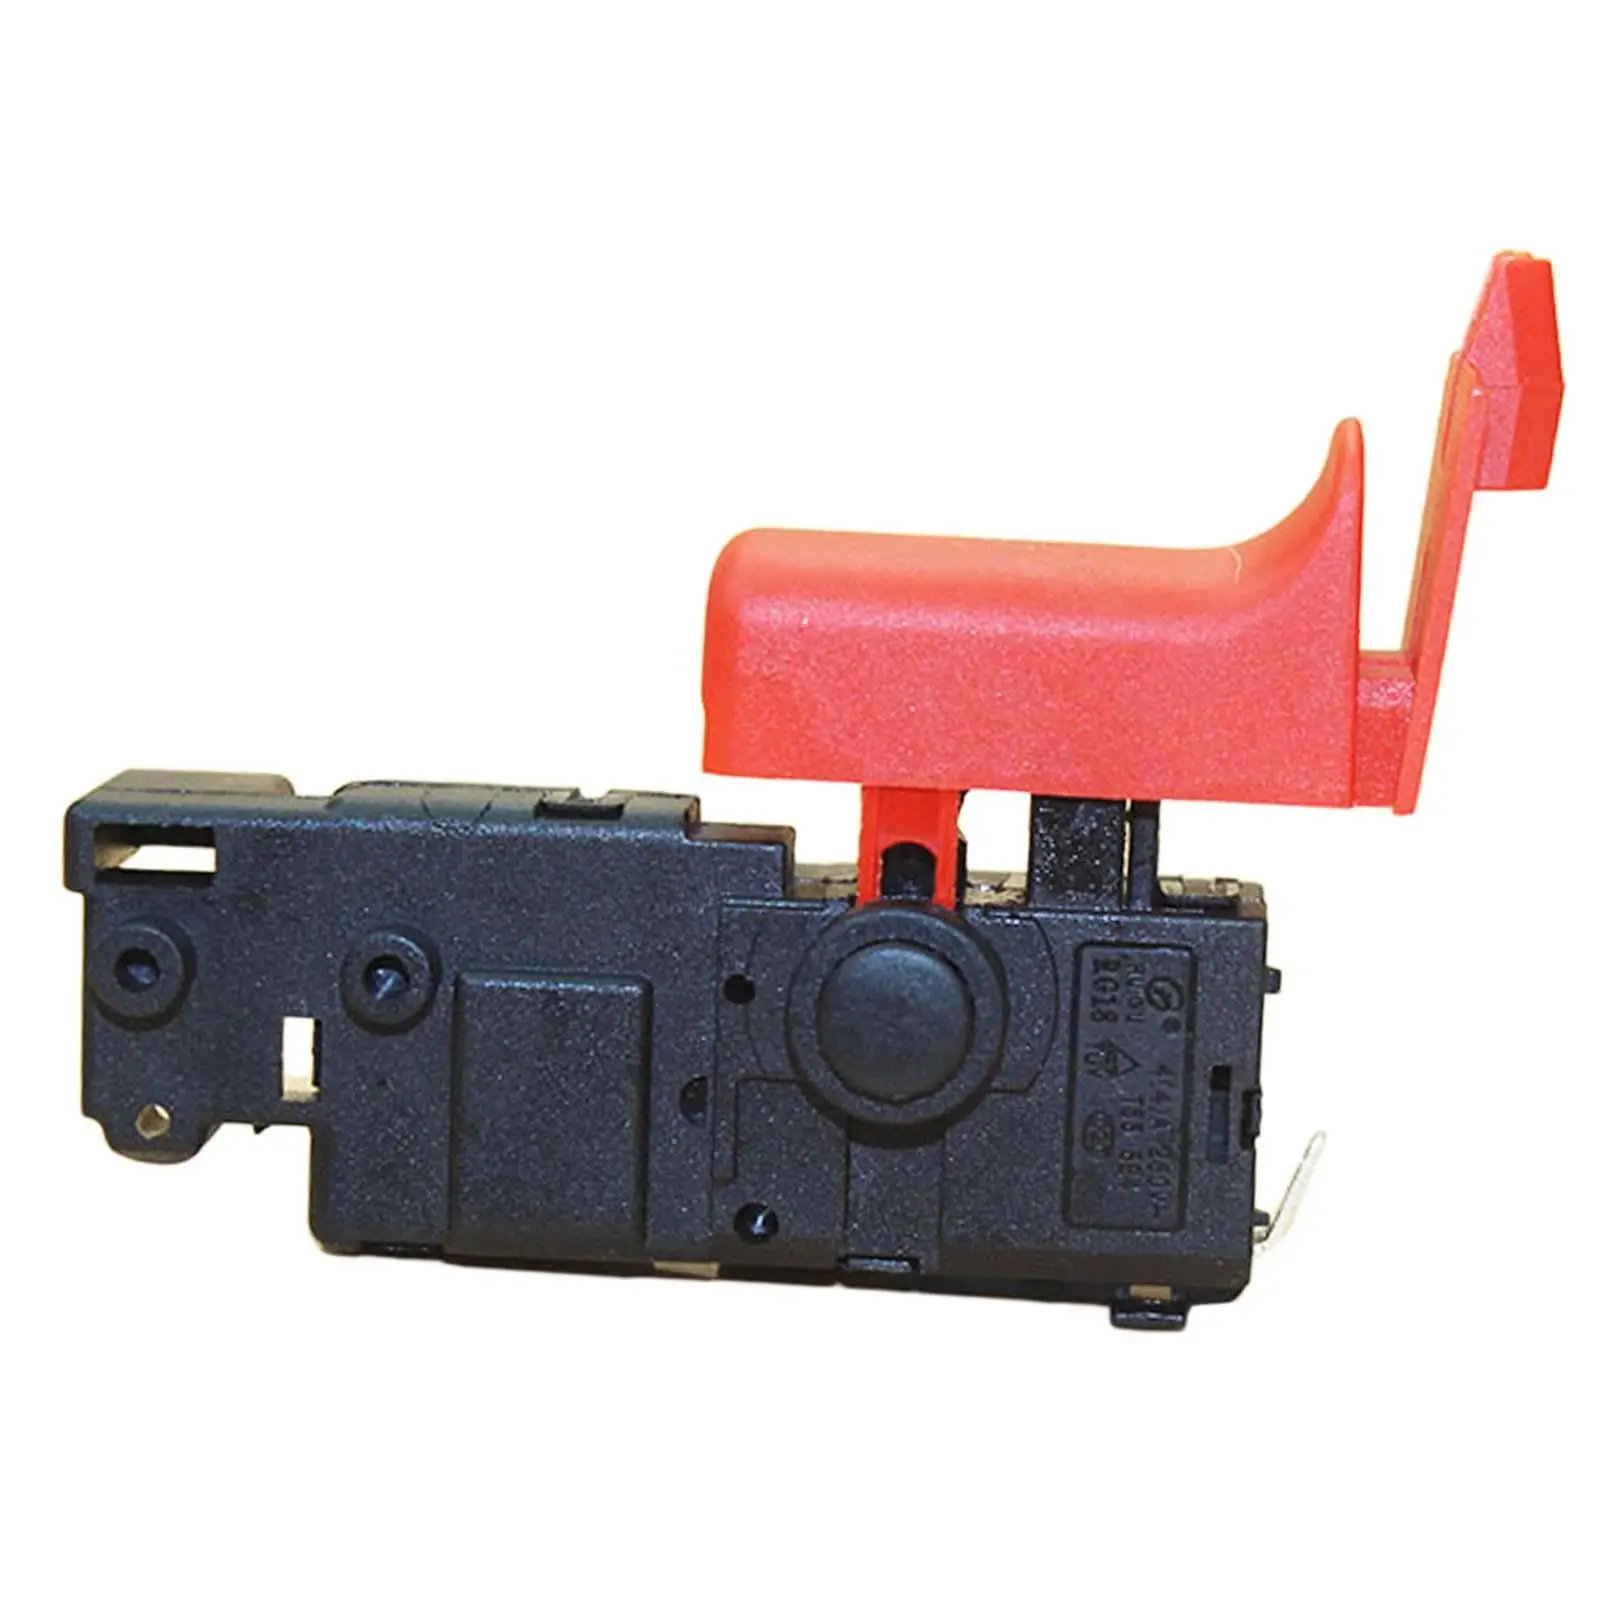 Rotory Hammer Switch Replacement for  GBH 2-28 D/22/26 GBH2-26DRE